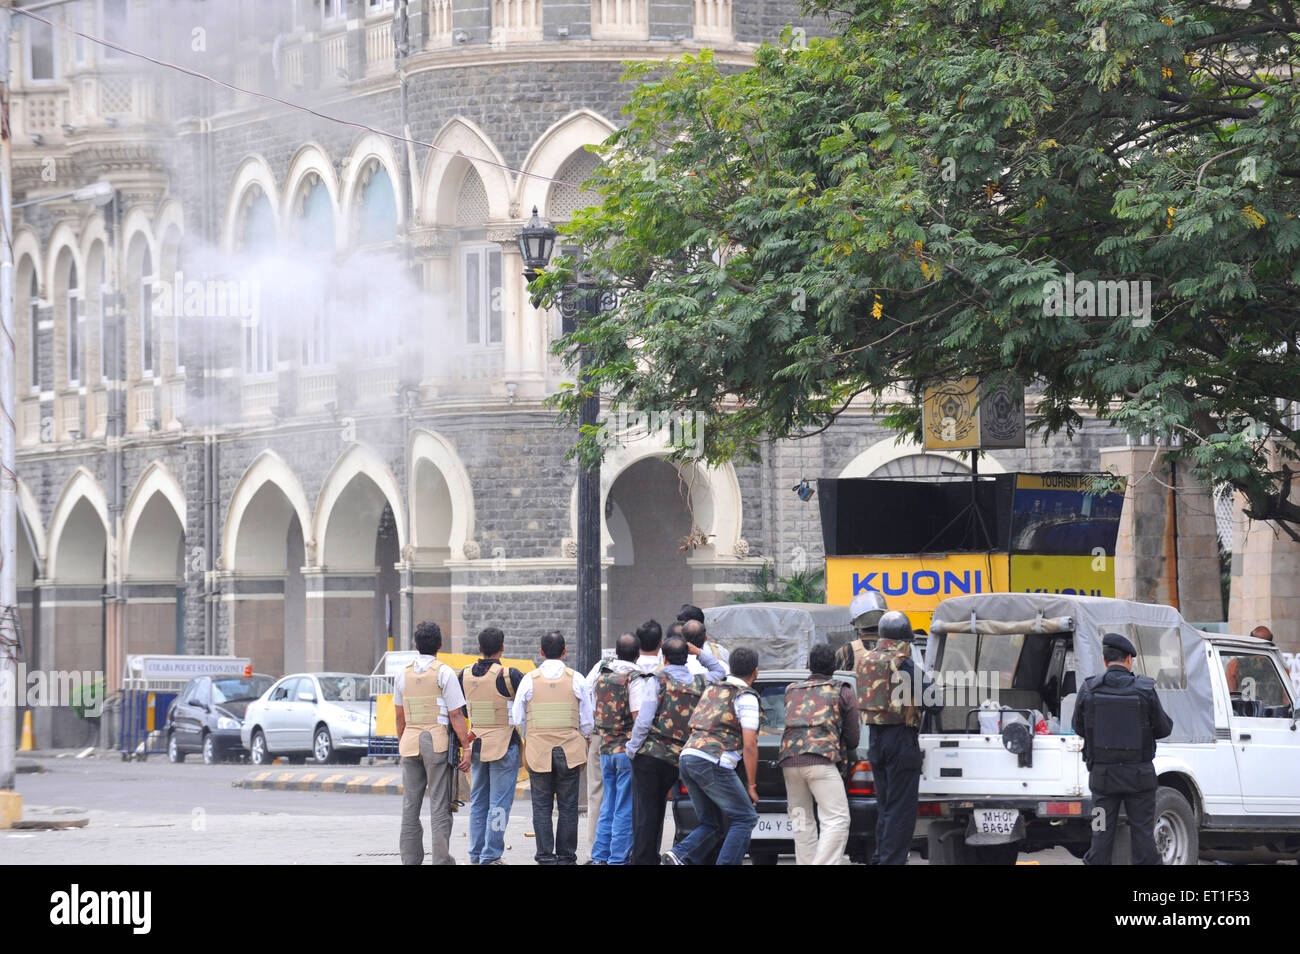 Fire inside the Taj Mahal hotel ; after terrorist attack by Deccan Mujahideen on 26th November 2008 in Bombay Stock Photo